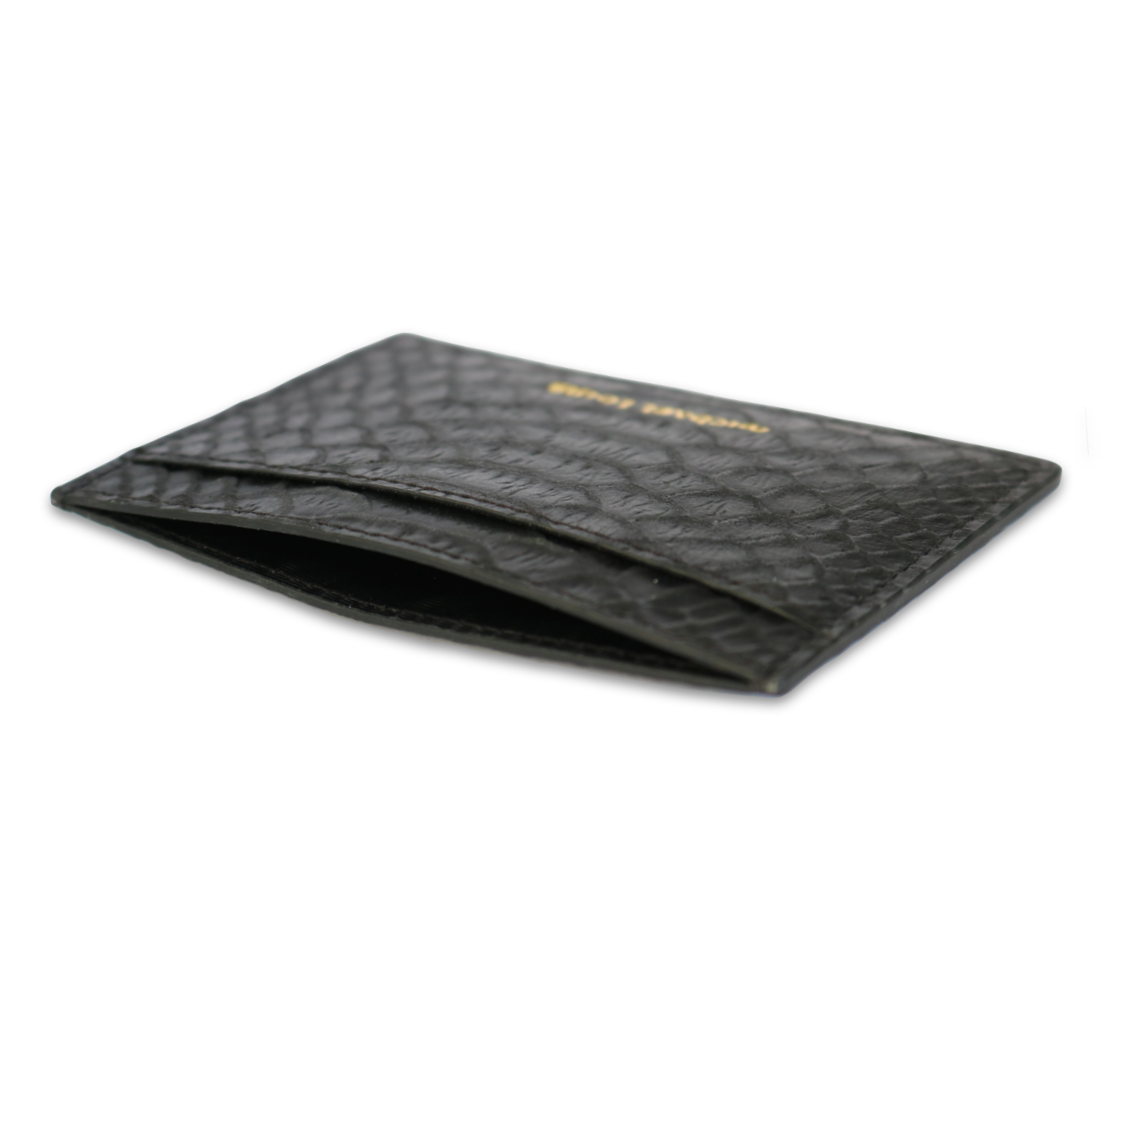 Python leather wallet in grey with coin purse